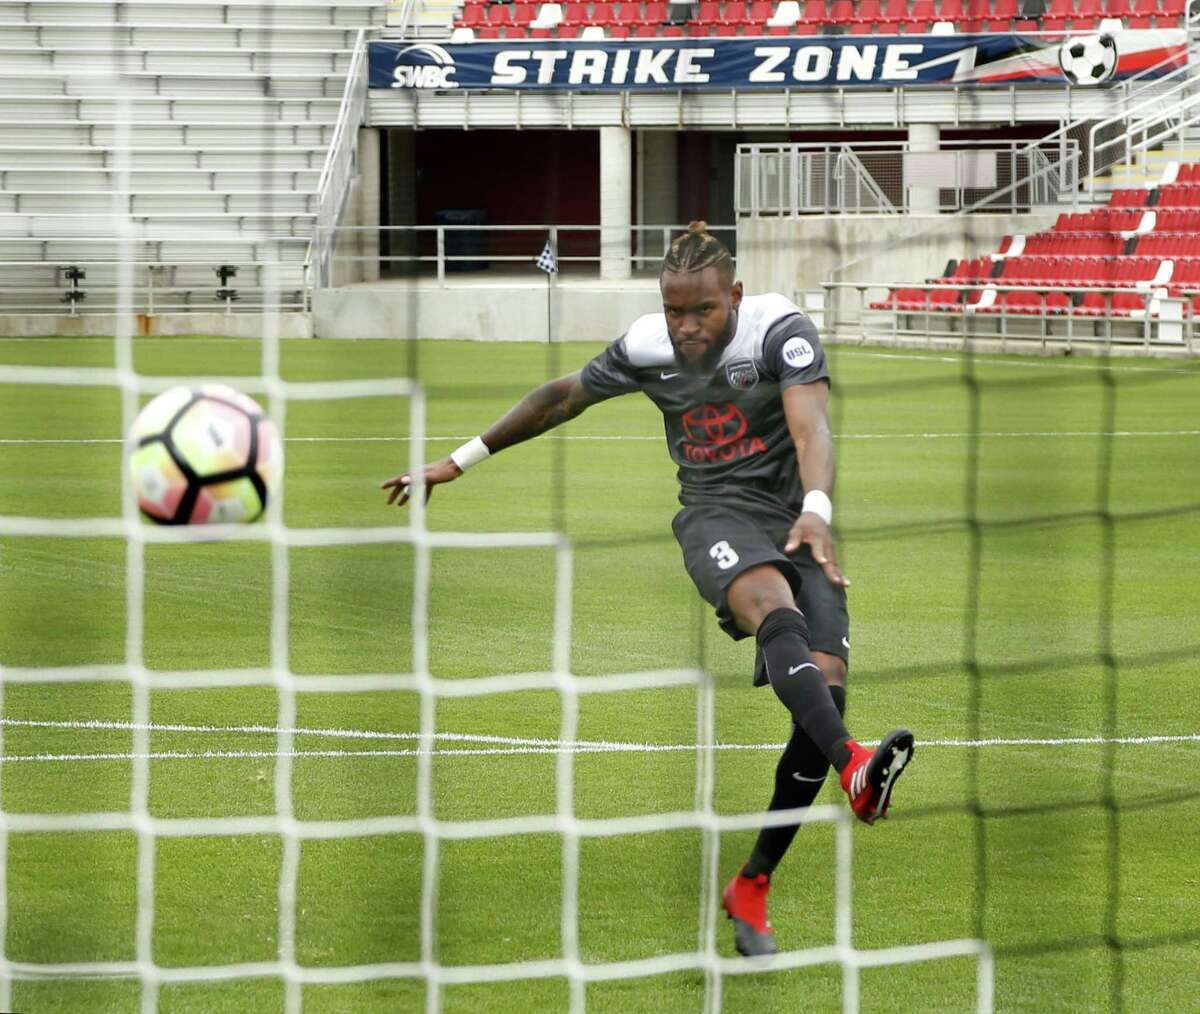 San Antonio FC player Sebastien Ibeagha takes a shot on goal during the team’s media day event on March 8, 2017, at Toyota Field.